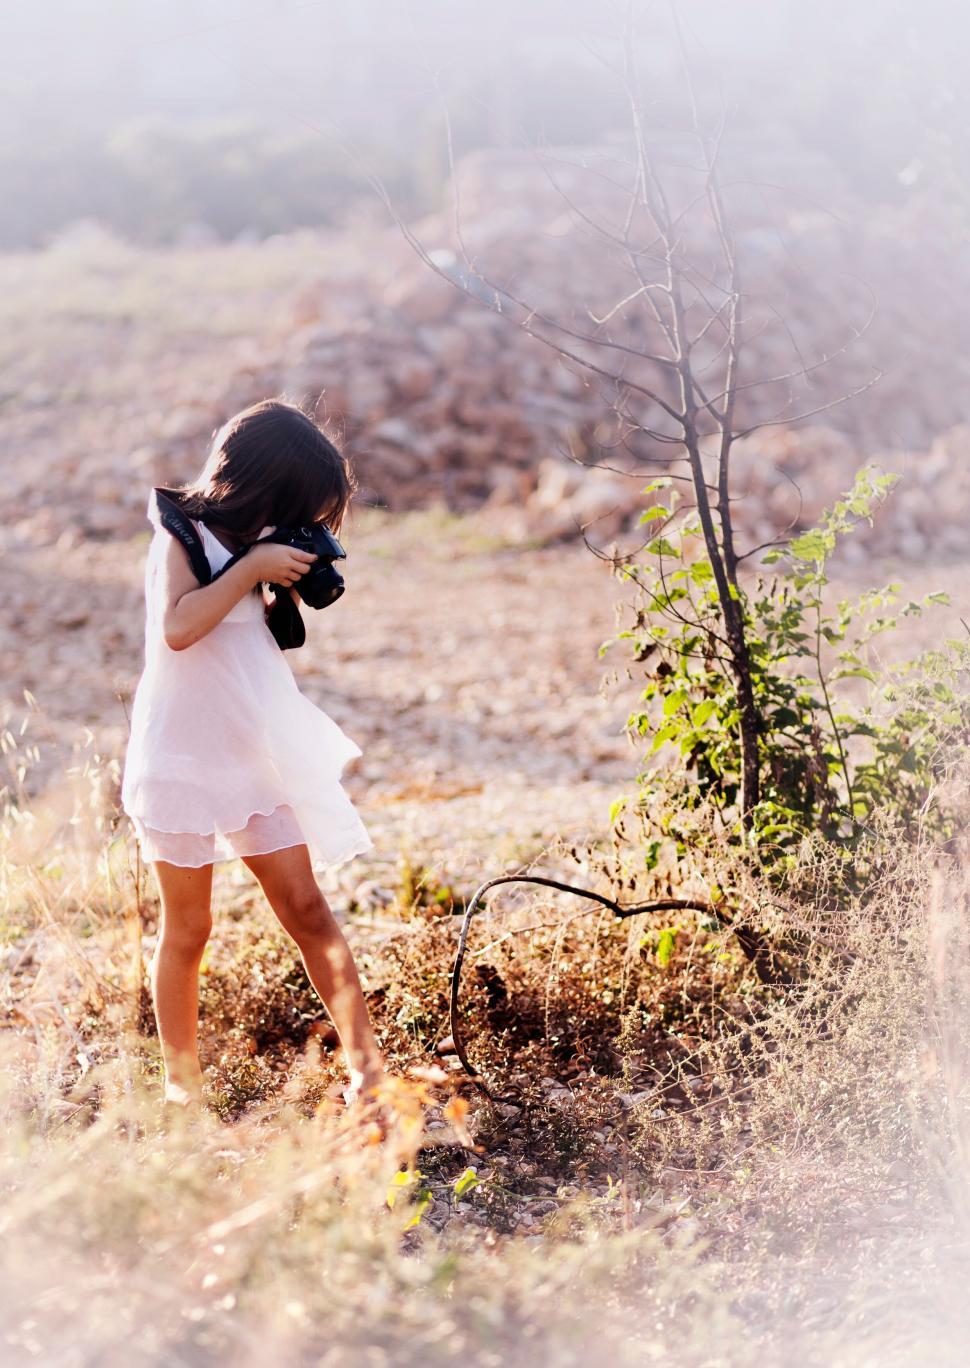 Free Image of Young girl photographing in a field at sunset 